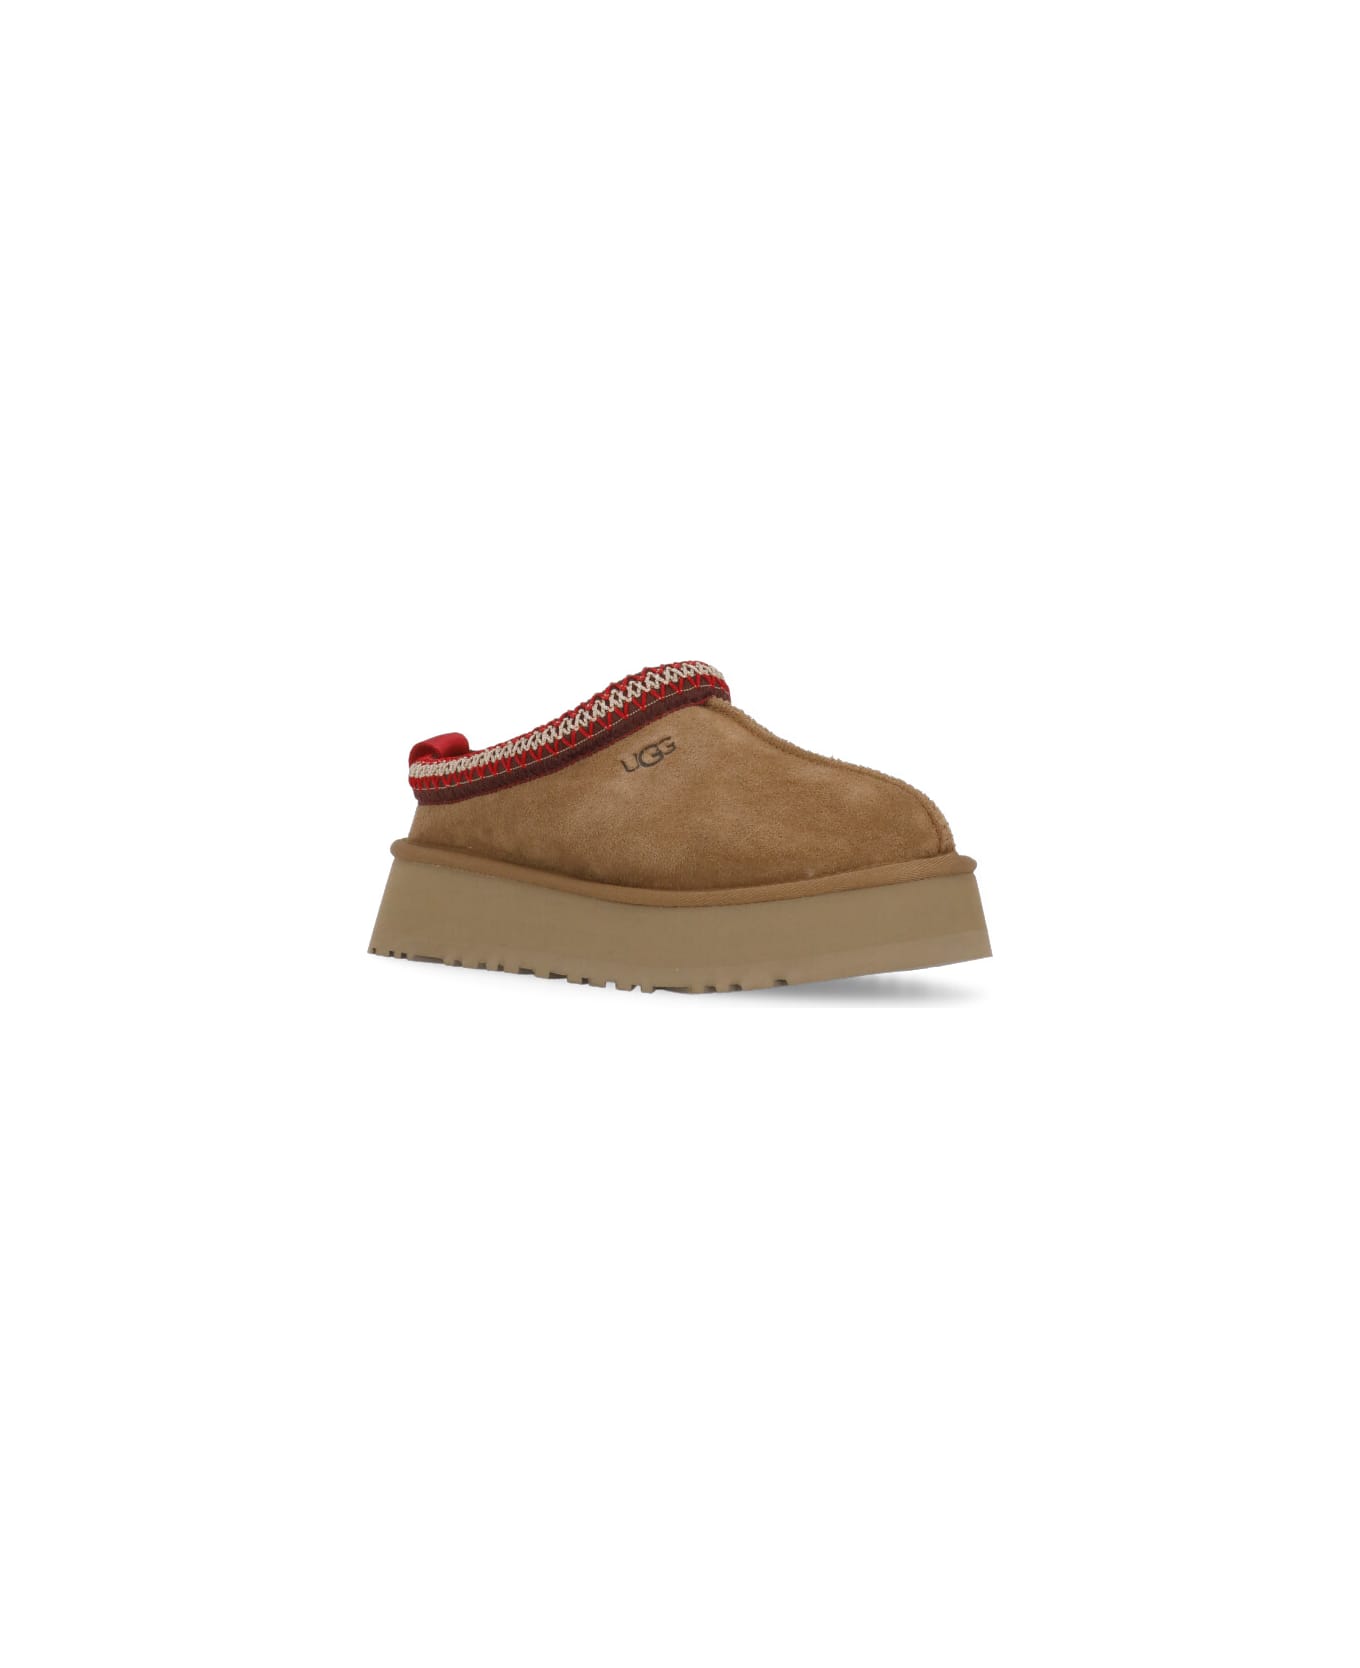 UGG Tazz Slippers - Brown